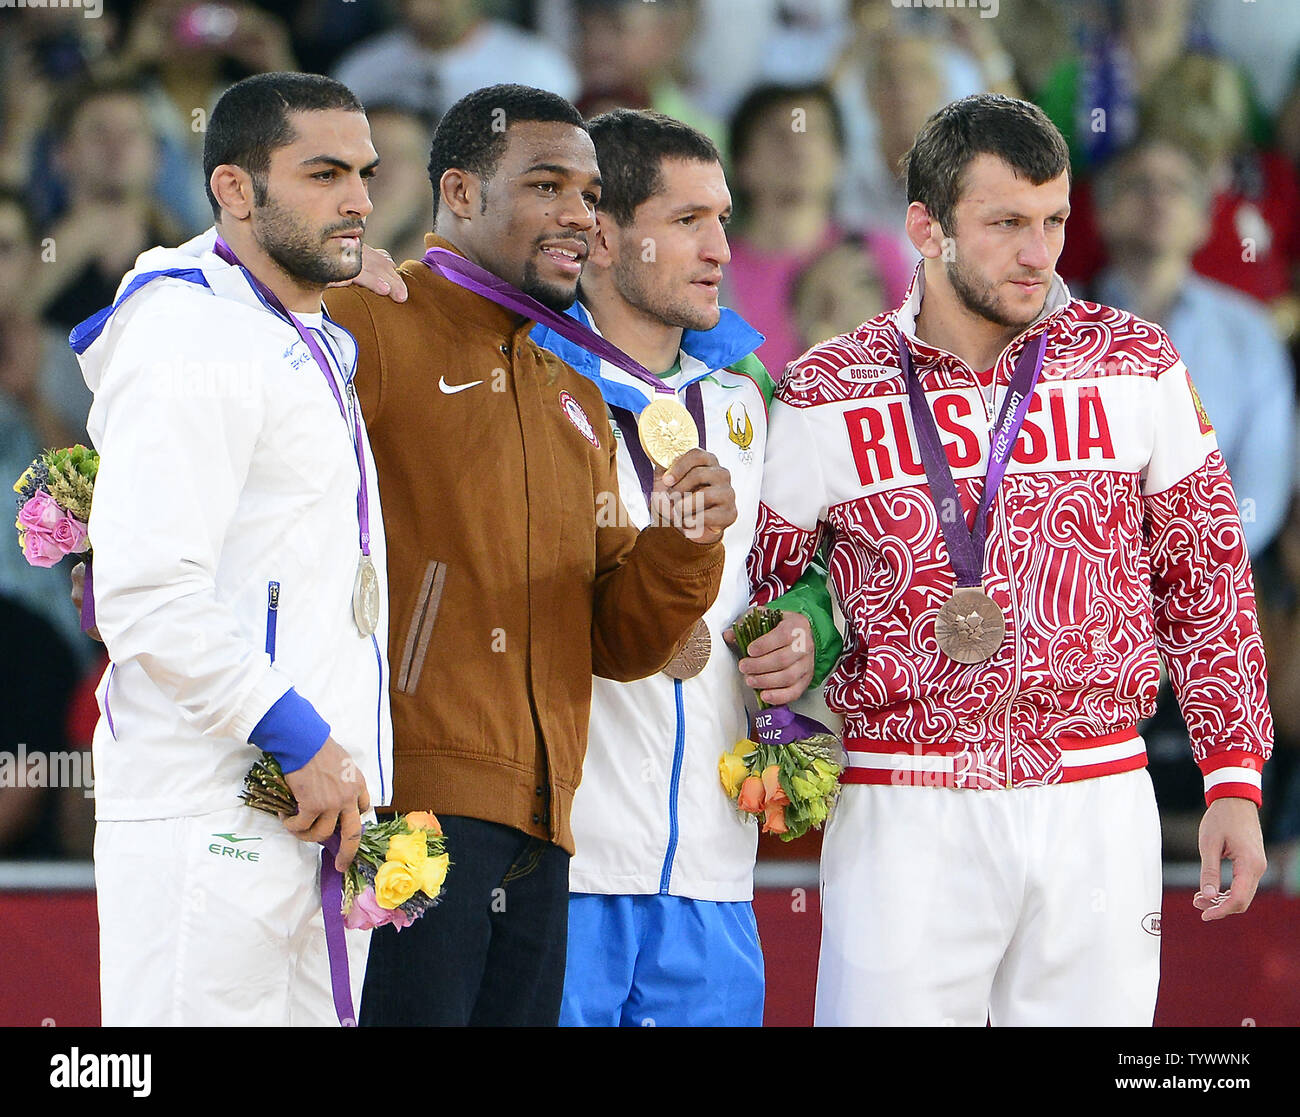 Medalists in the Men's 74kg Freestyle Wrestling show off their hardware at the London 2012 Summer Olympics on August 10, 2012 in London.  From left to right: Sadegh Saeed Goudarzi of Iran, Silver Medal; Jordan Ernest Burroughs of the United States of America, Gold Medal; Soslan Tigiev of Uzbekistan; and Denis Tsargush of Russia, Bronze Medal.UPI/Ron Sachs Stock Photo